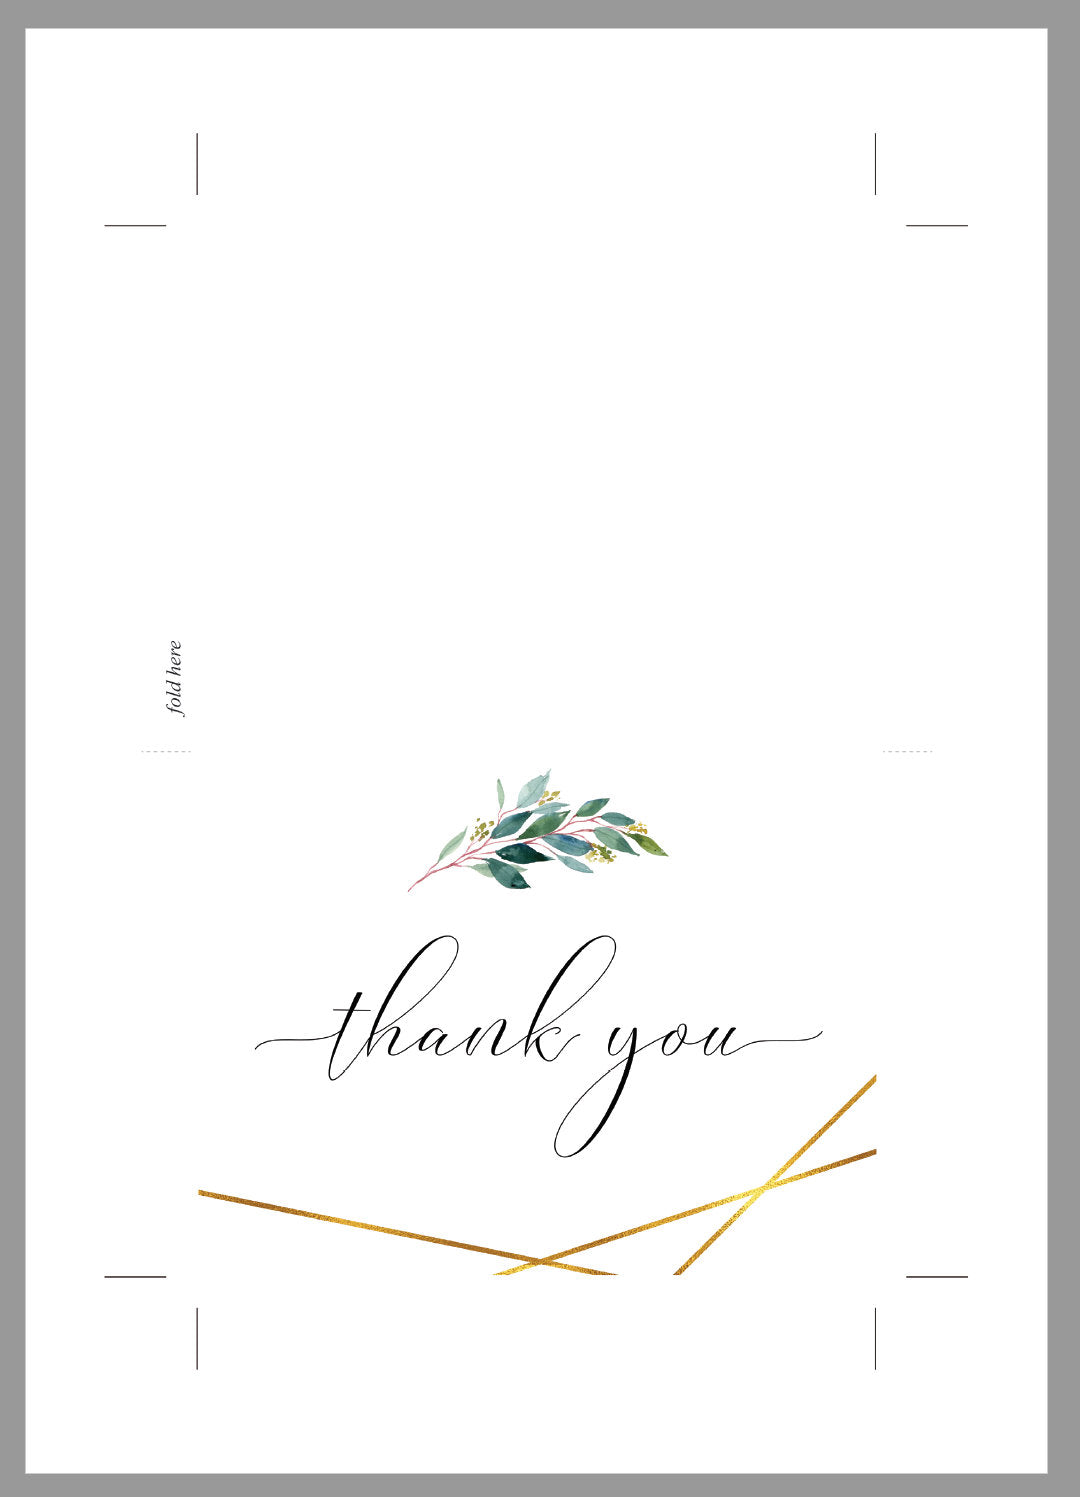 Geometric Wedding Thank You Card, Instant Download, Thank you Cards, Printable Thank You, Wedding Cards, Greenery, Gold - TARA TAGS | TY | INSERTS SAVVY PAPER CO